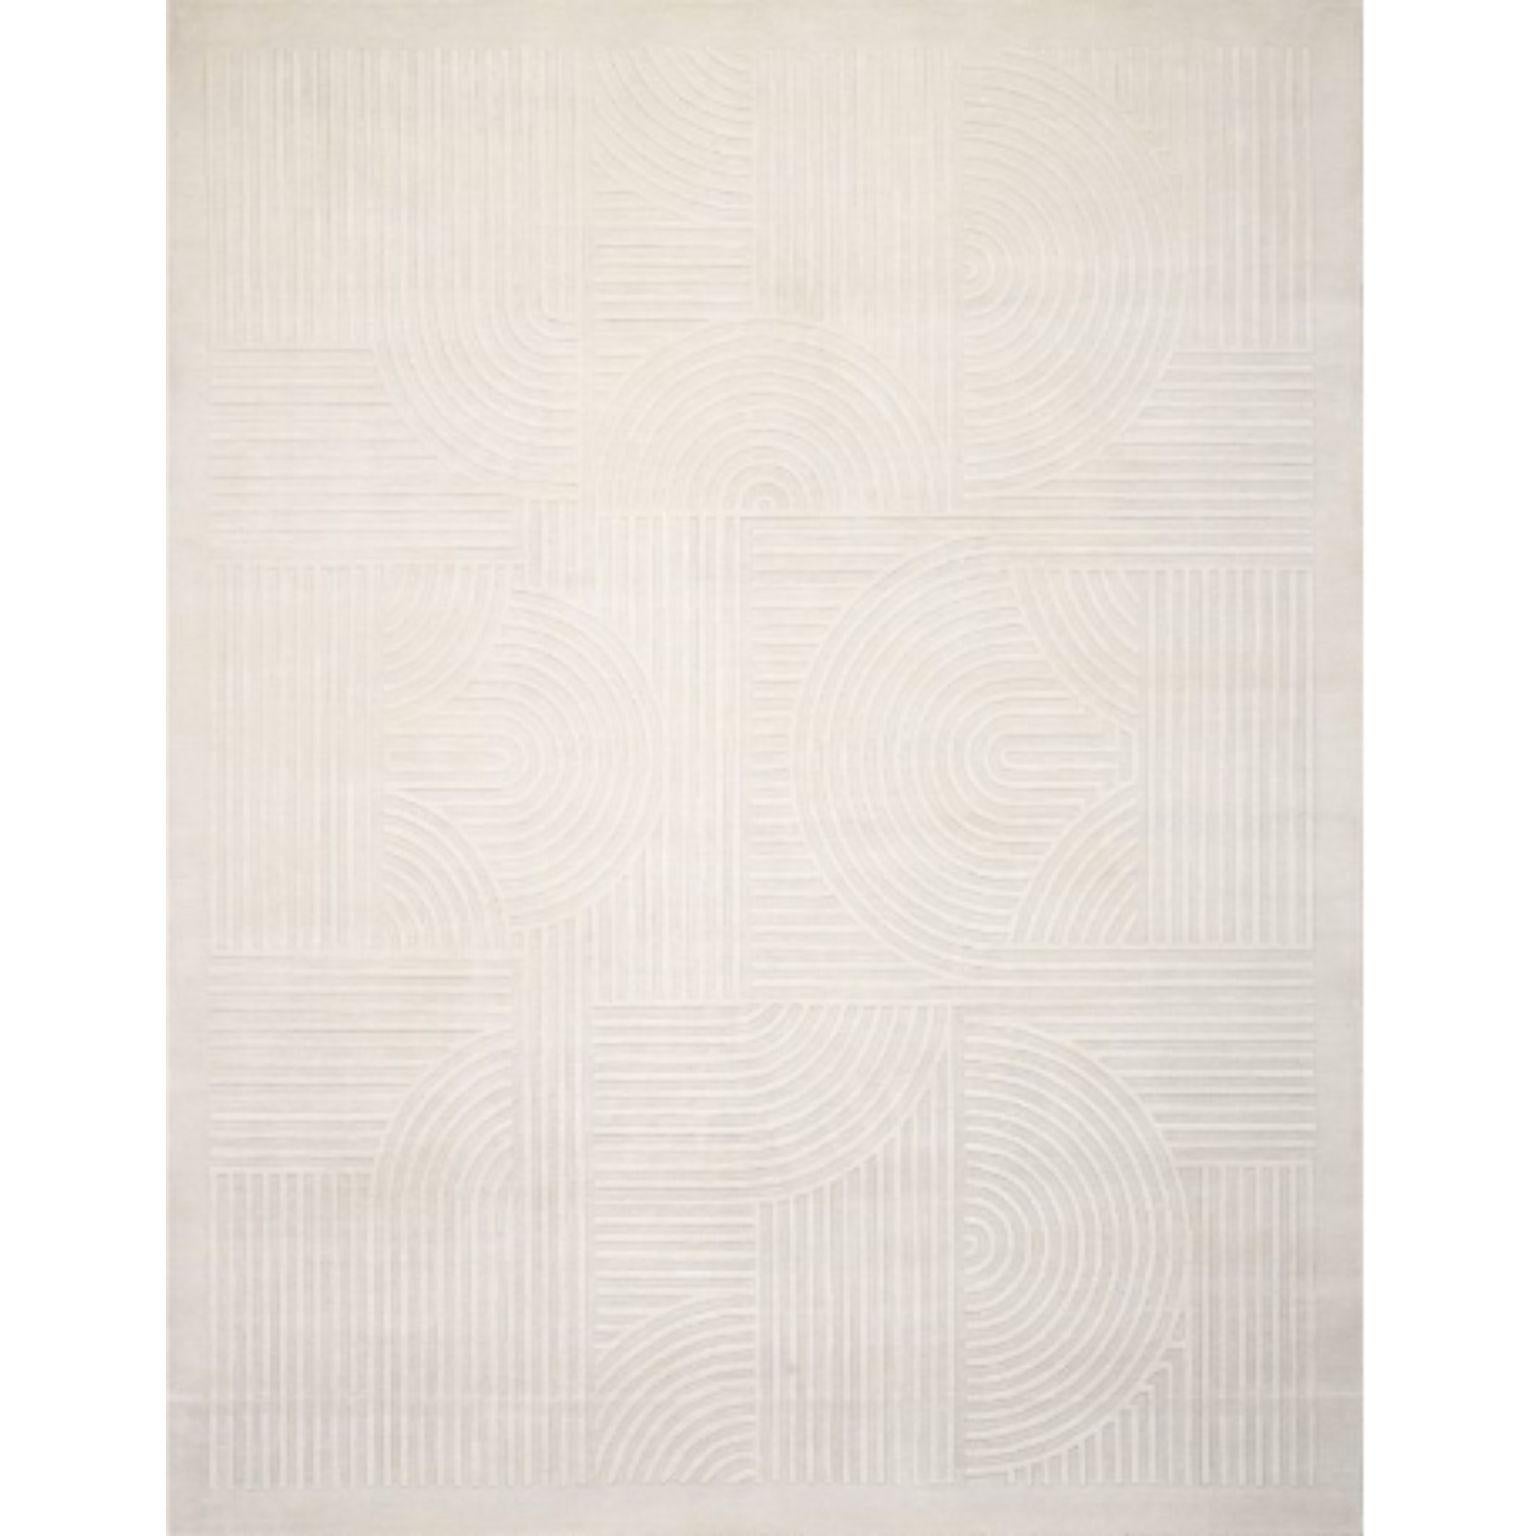 KYOTO 200 Rug by Illulian
Dimensions: D300 x H200 cm 
Materials: Wool 100%
Variations available and prices may vary according to materials and sizes. Please contact us.

Illulian, historic and prestigious rug company brand, internationally